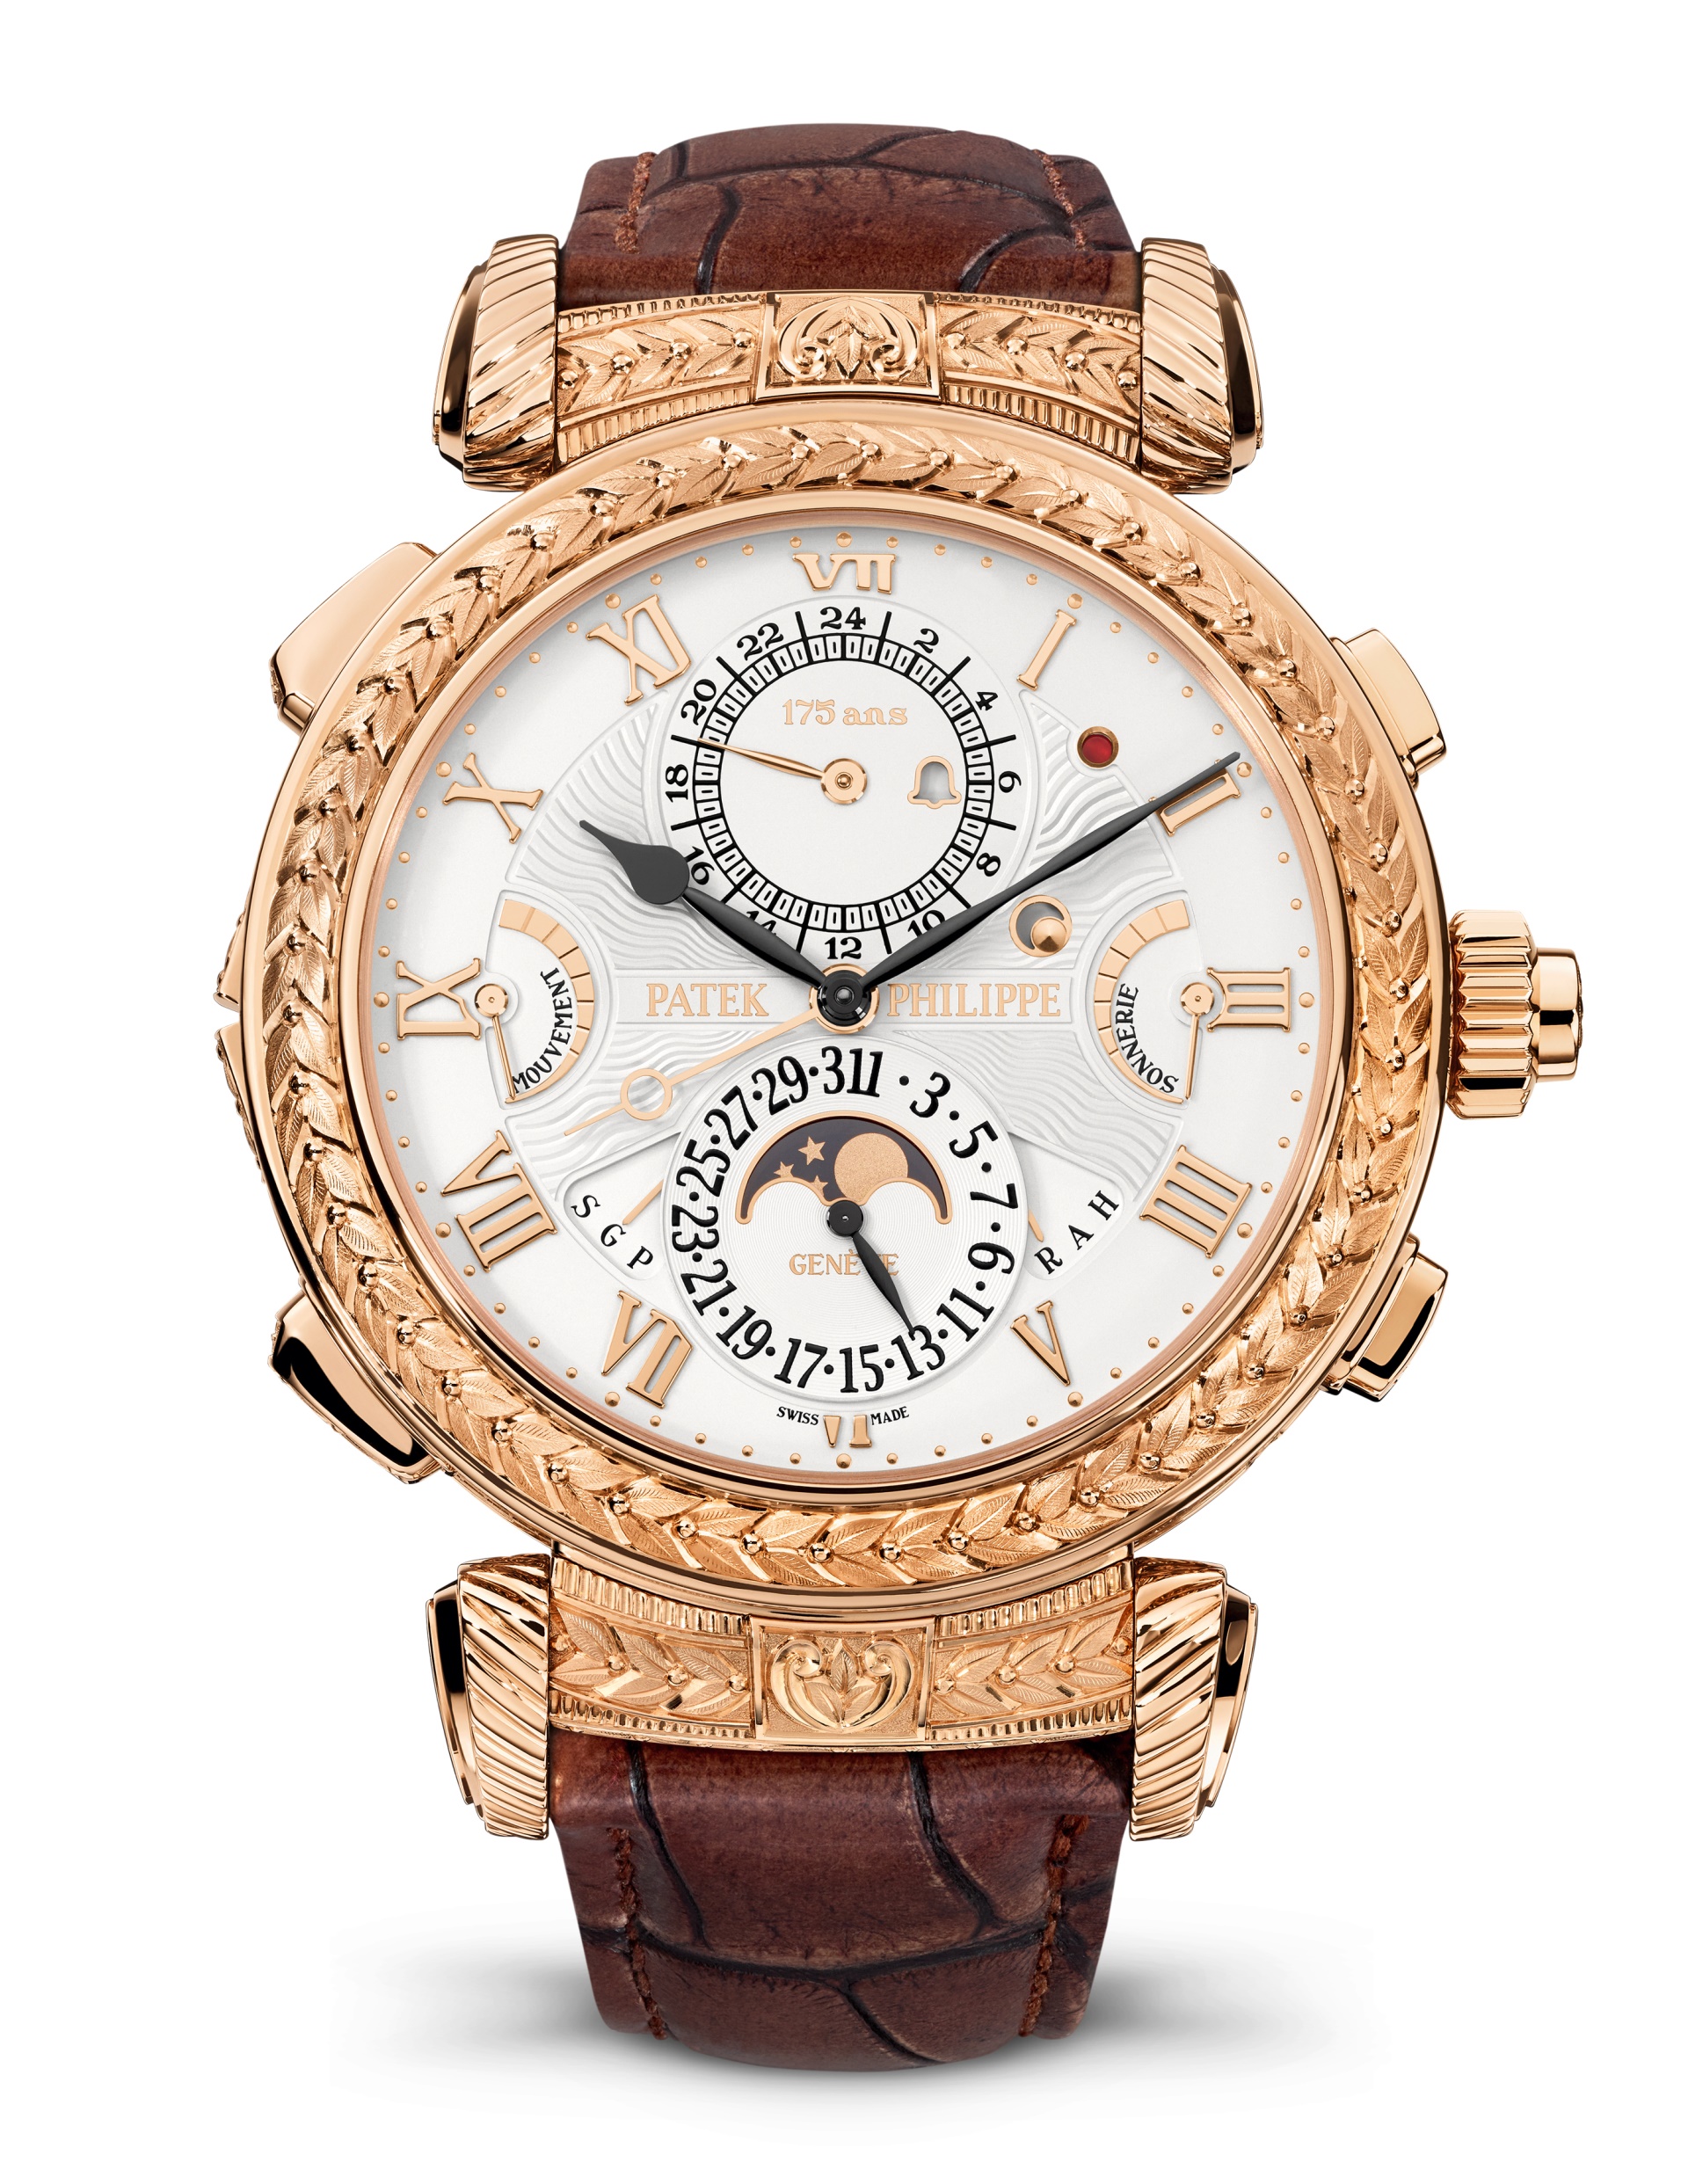 10 most expensive wristwatch: The Grandmaster Chime